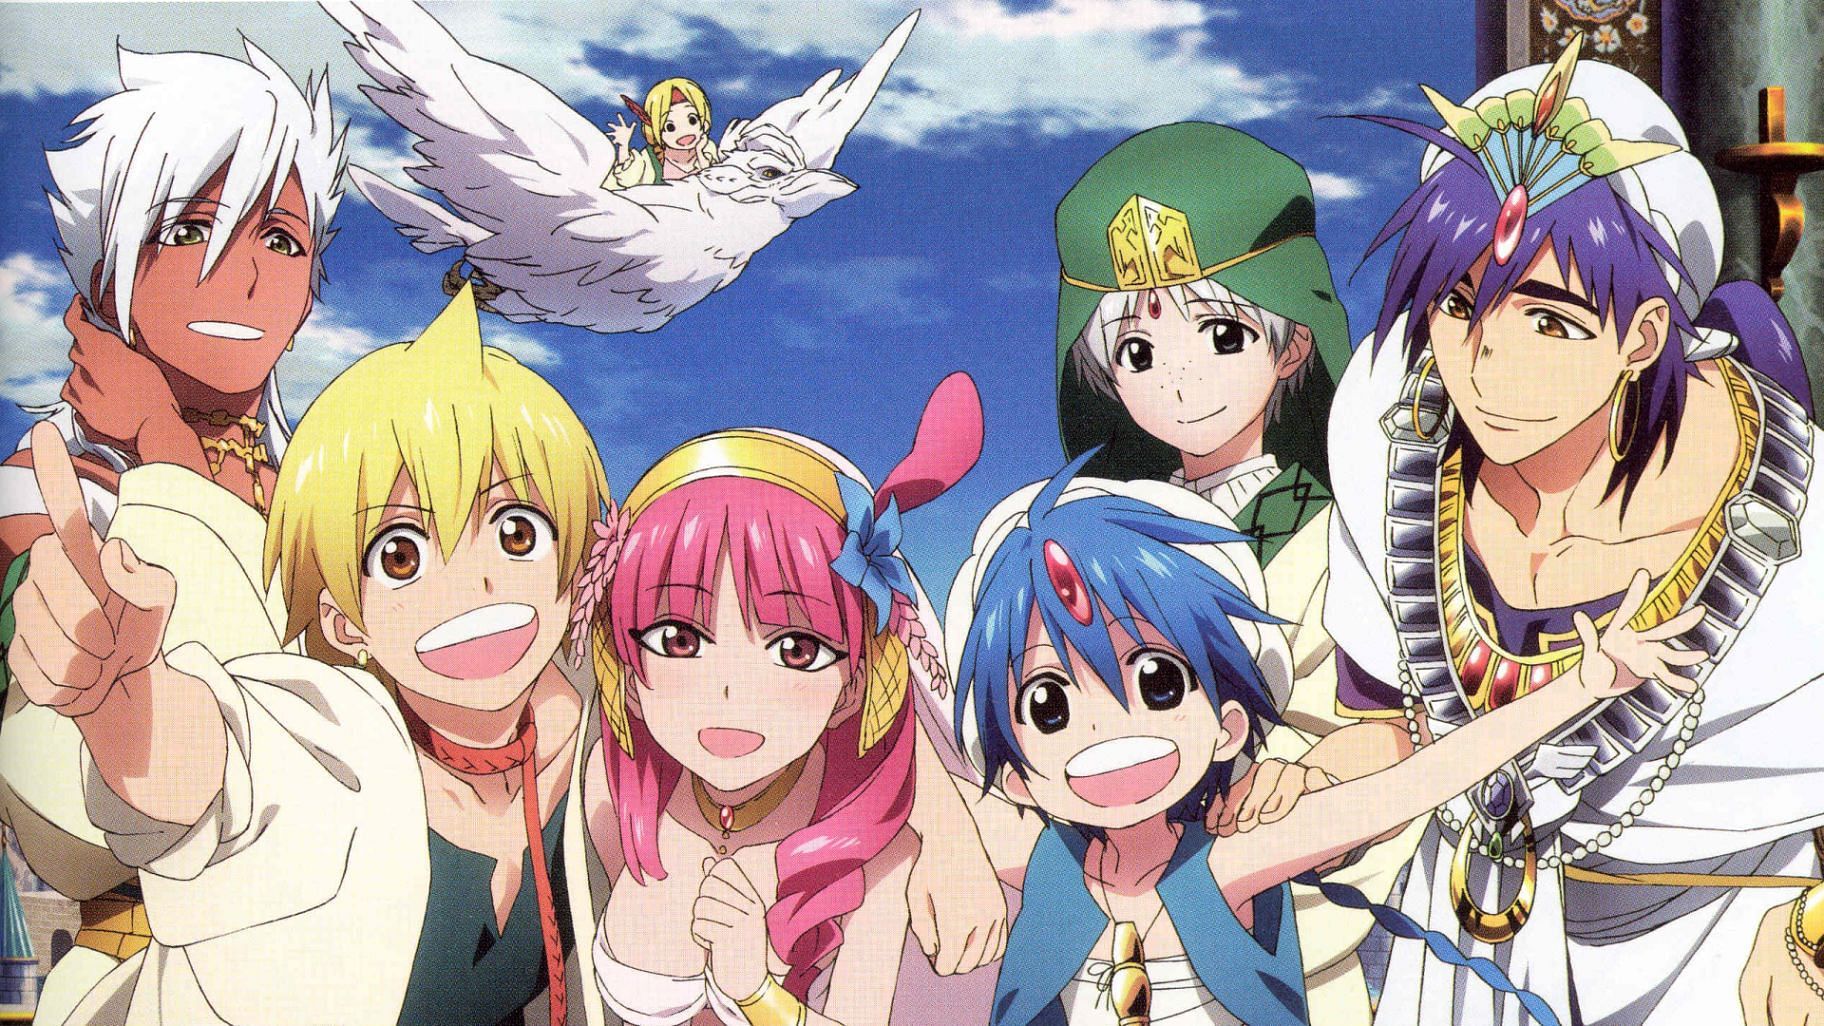 What's a Magi in 'Magi: The Labyrinth of Magic' and What Are Their Powers?